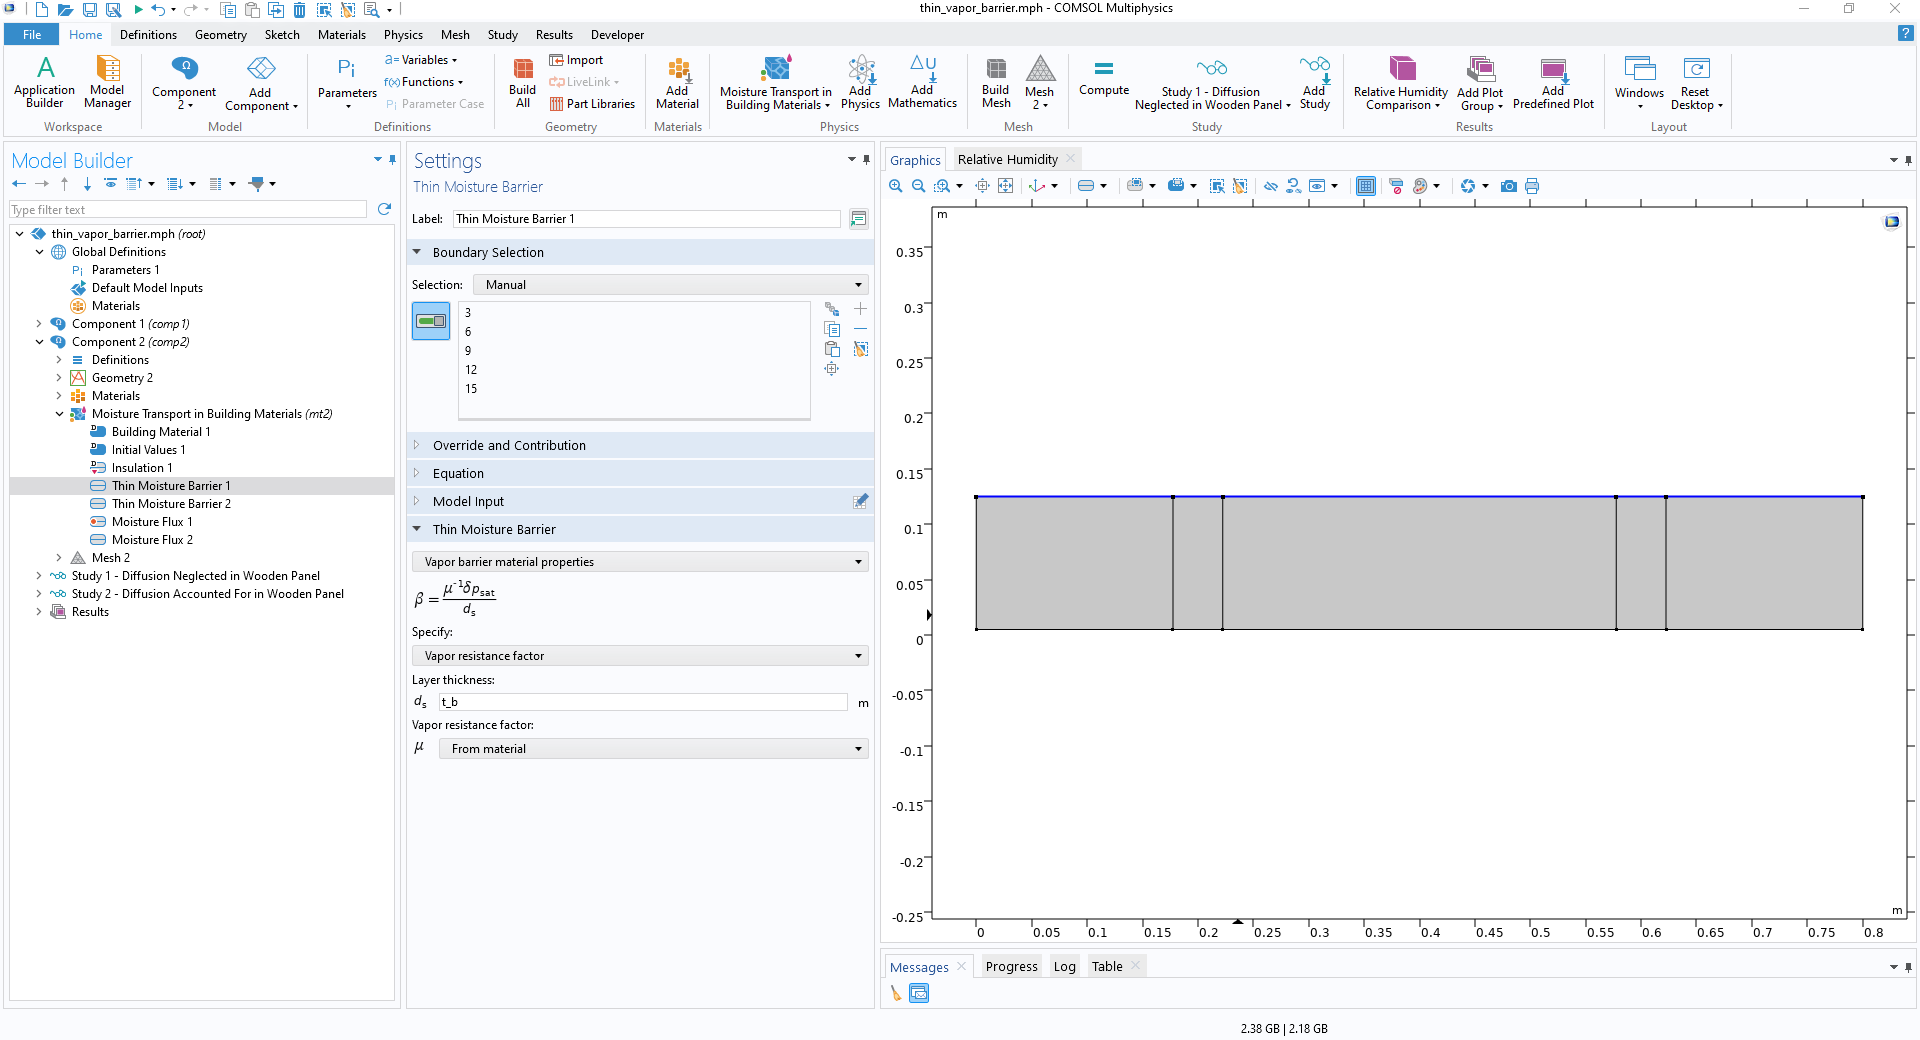 The COMSOL Multiphysics UI showing the Model Builder with a Thin Moisture Barrier node highlighted, the corresponding Settings window, and a thin vapor barrier model in the Graphics window.